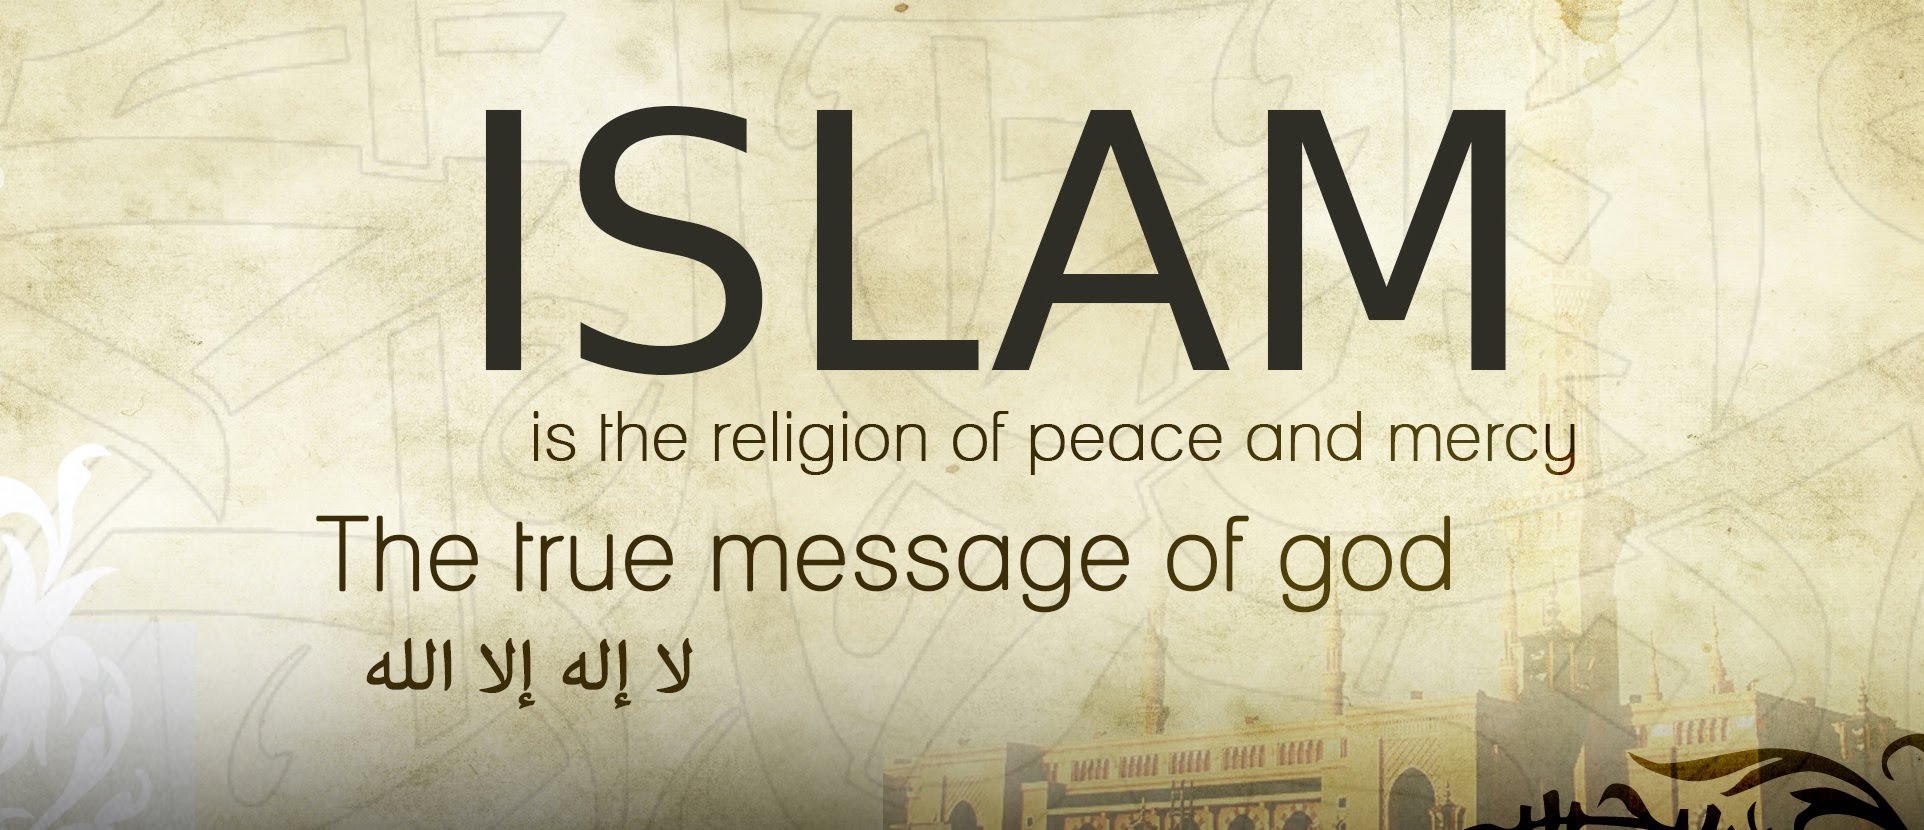 Why Is Islam the Only True Religion? (Part 1)